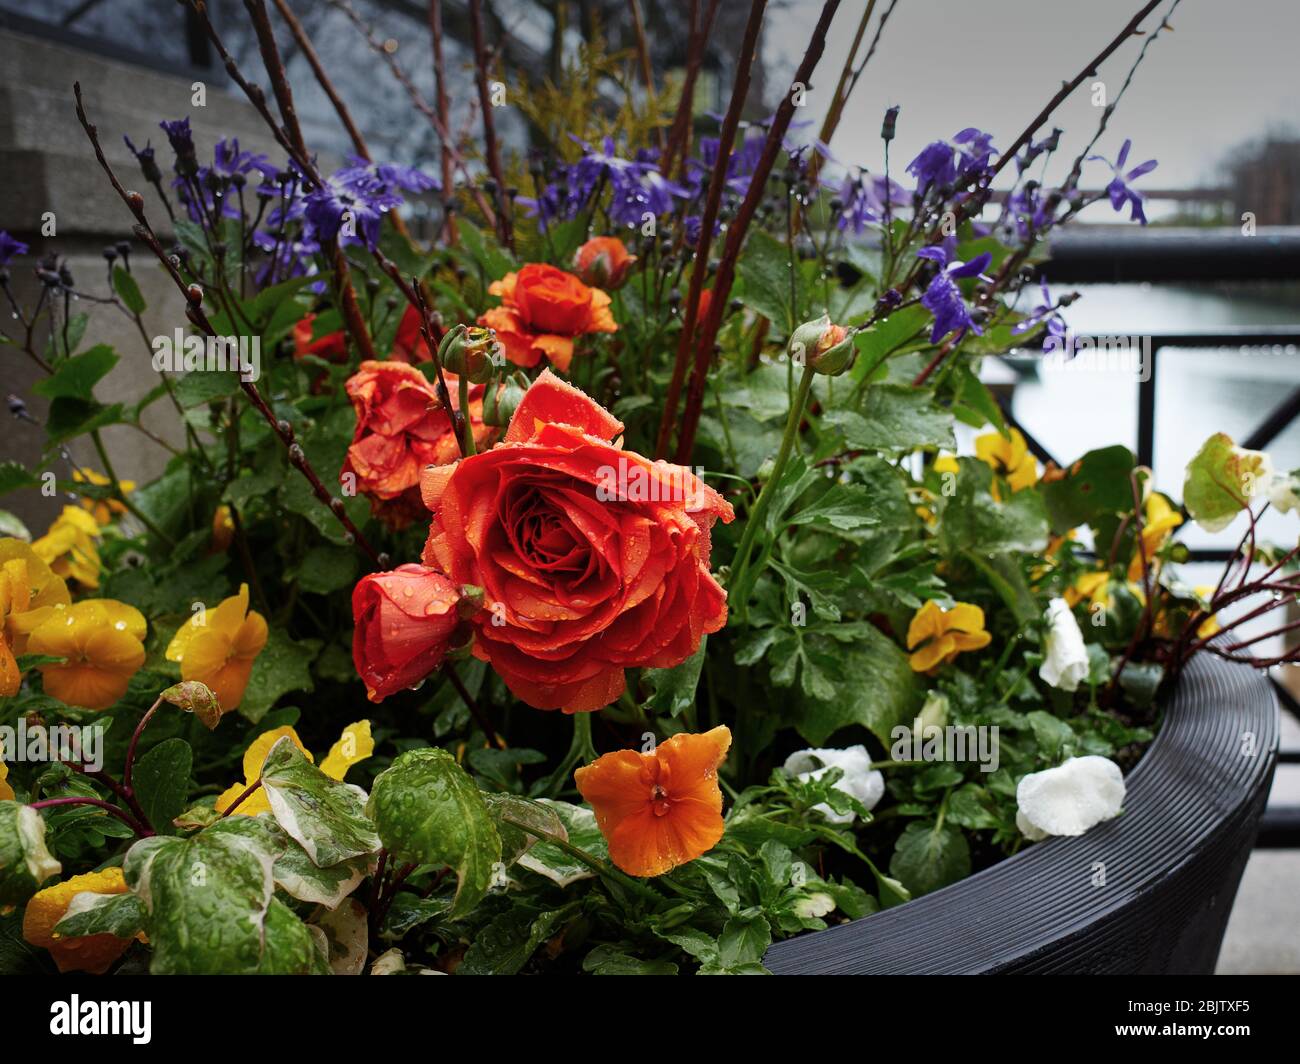 outdoor planter with raindrops on flowers Stock Photo